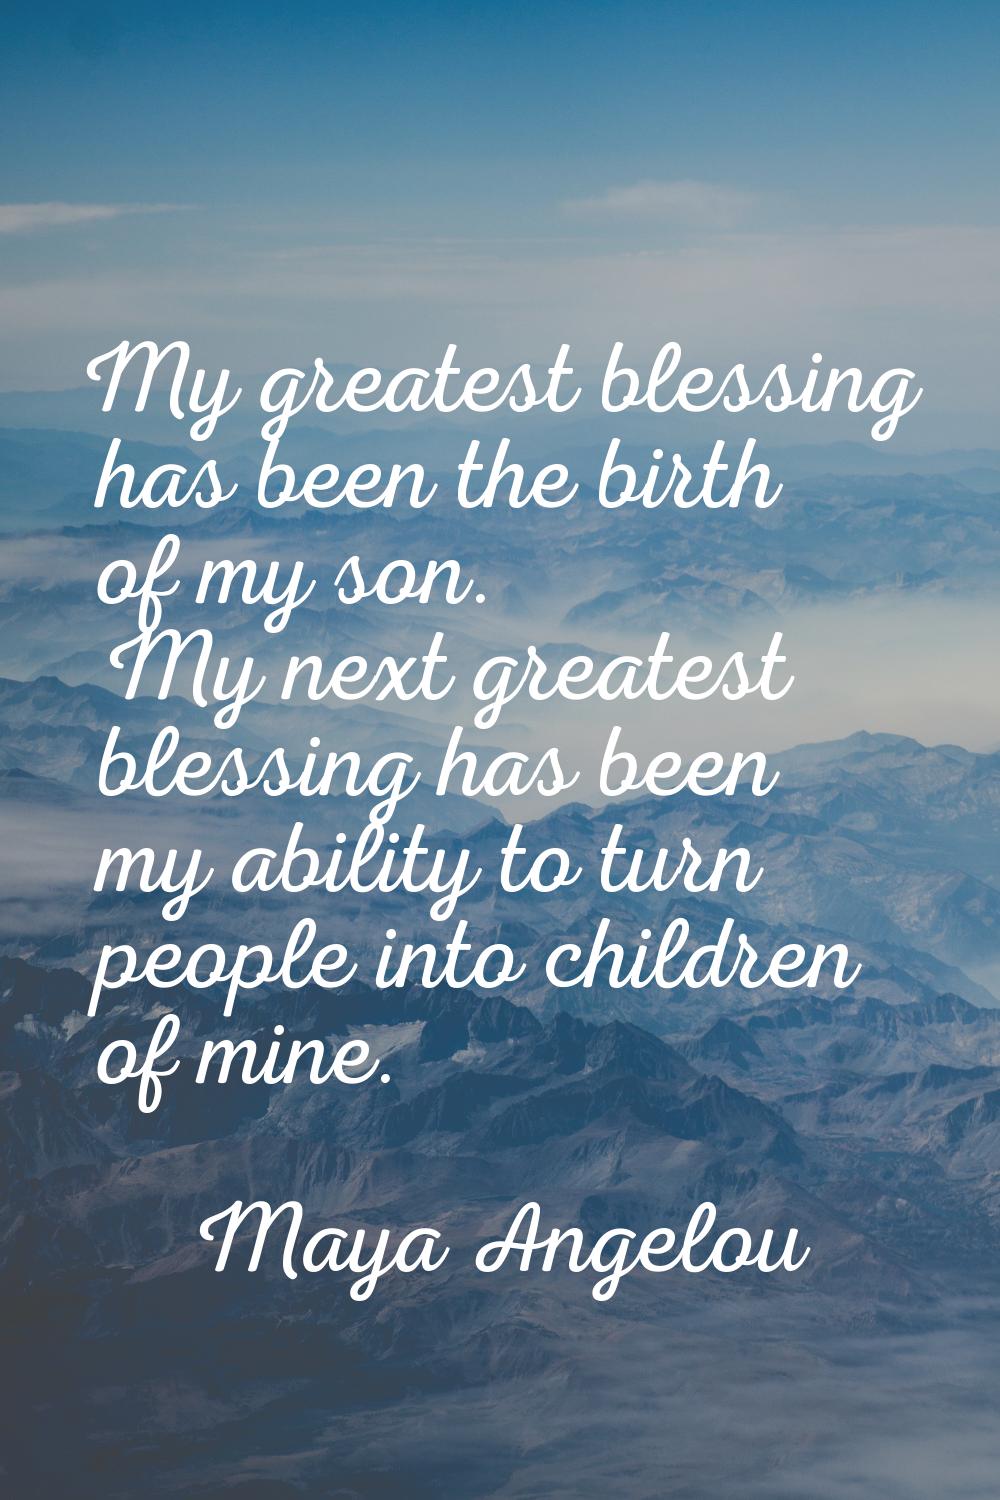 My greatest blessing has been the birth of my son. My next greatest blessing has been my ability to